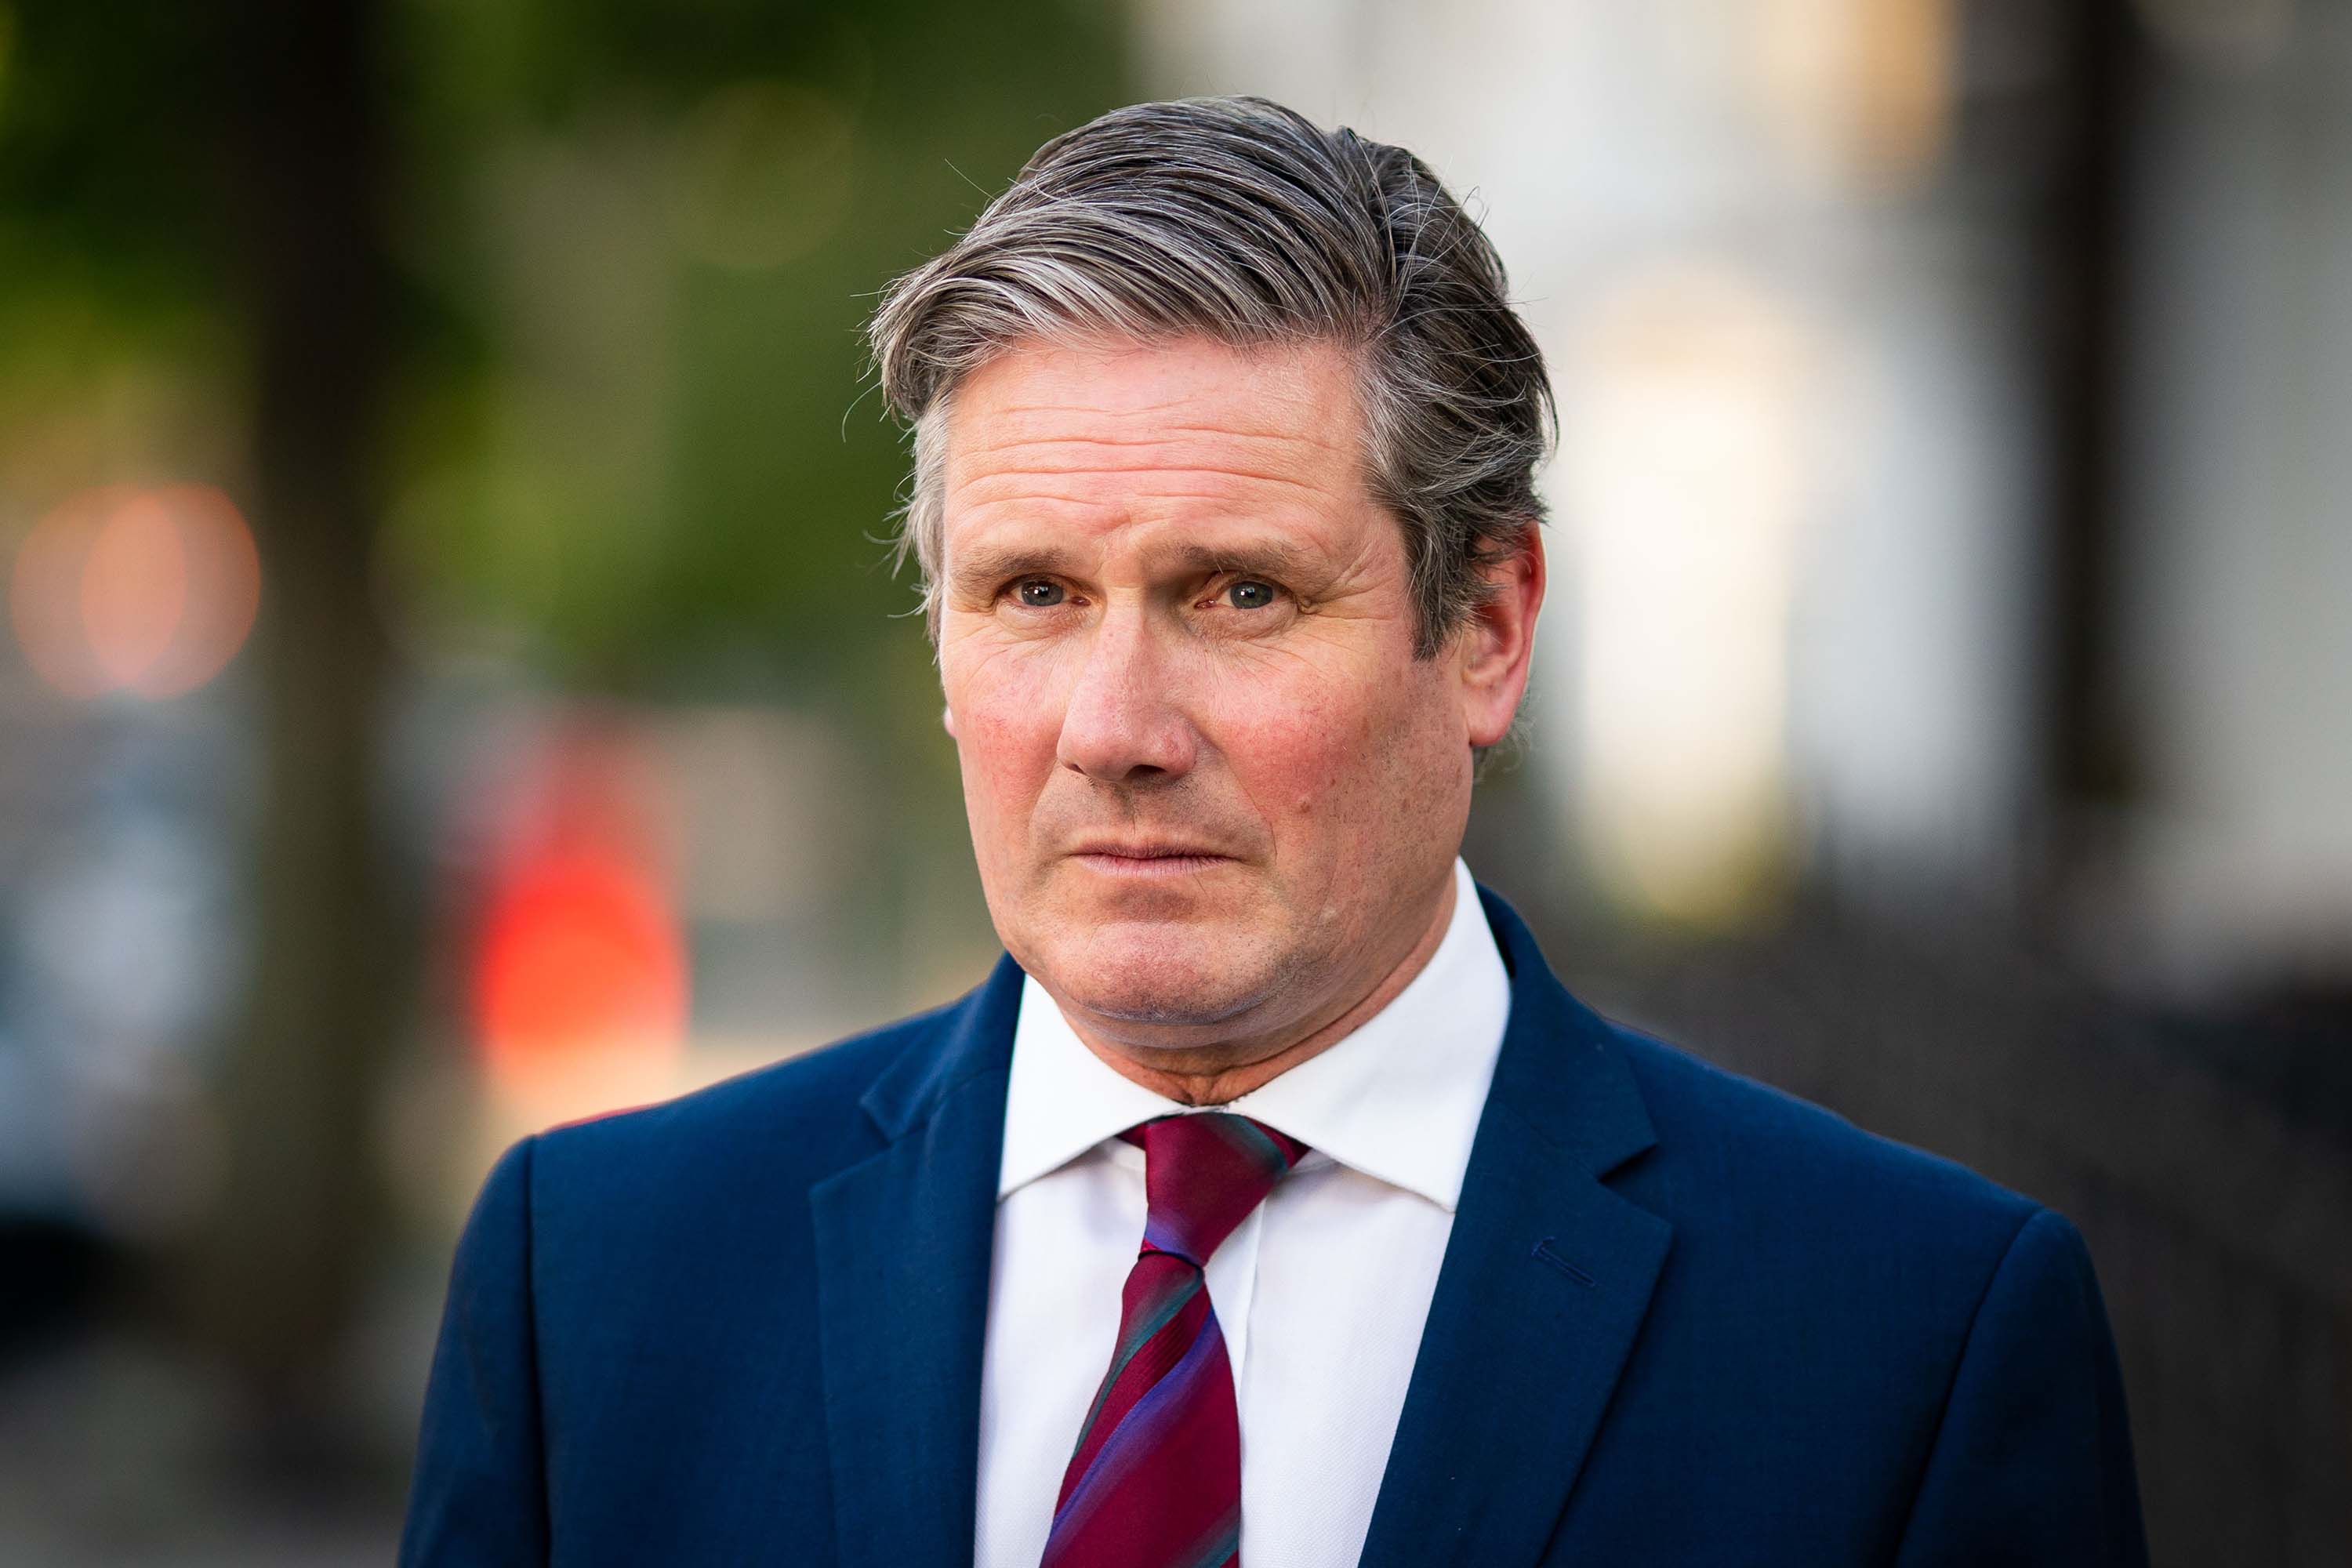 Labour leader Sir Keir Starmer speaks outside his home in London on May 24.